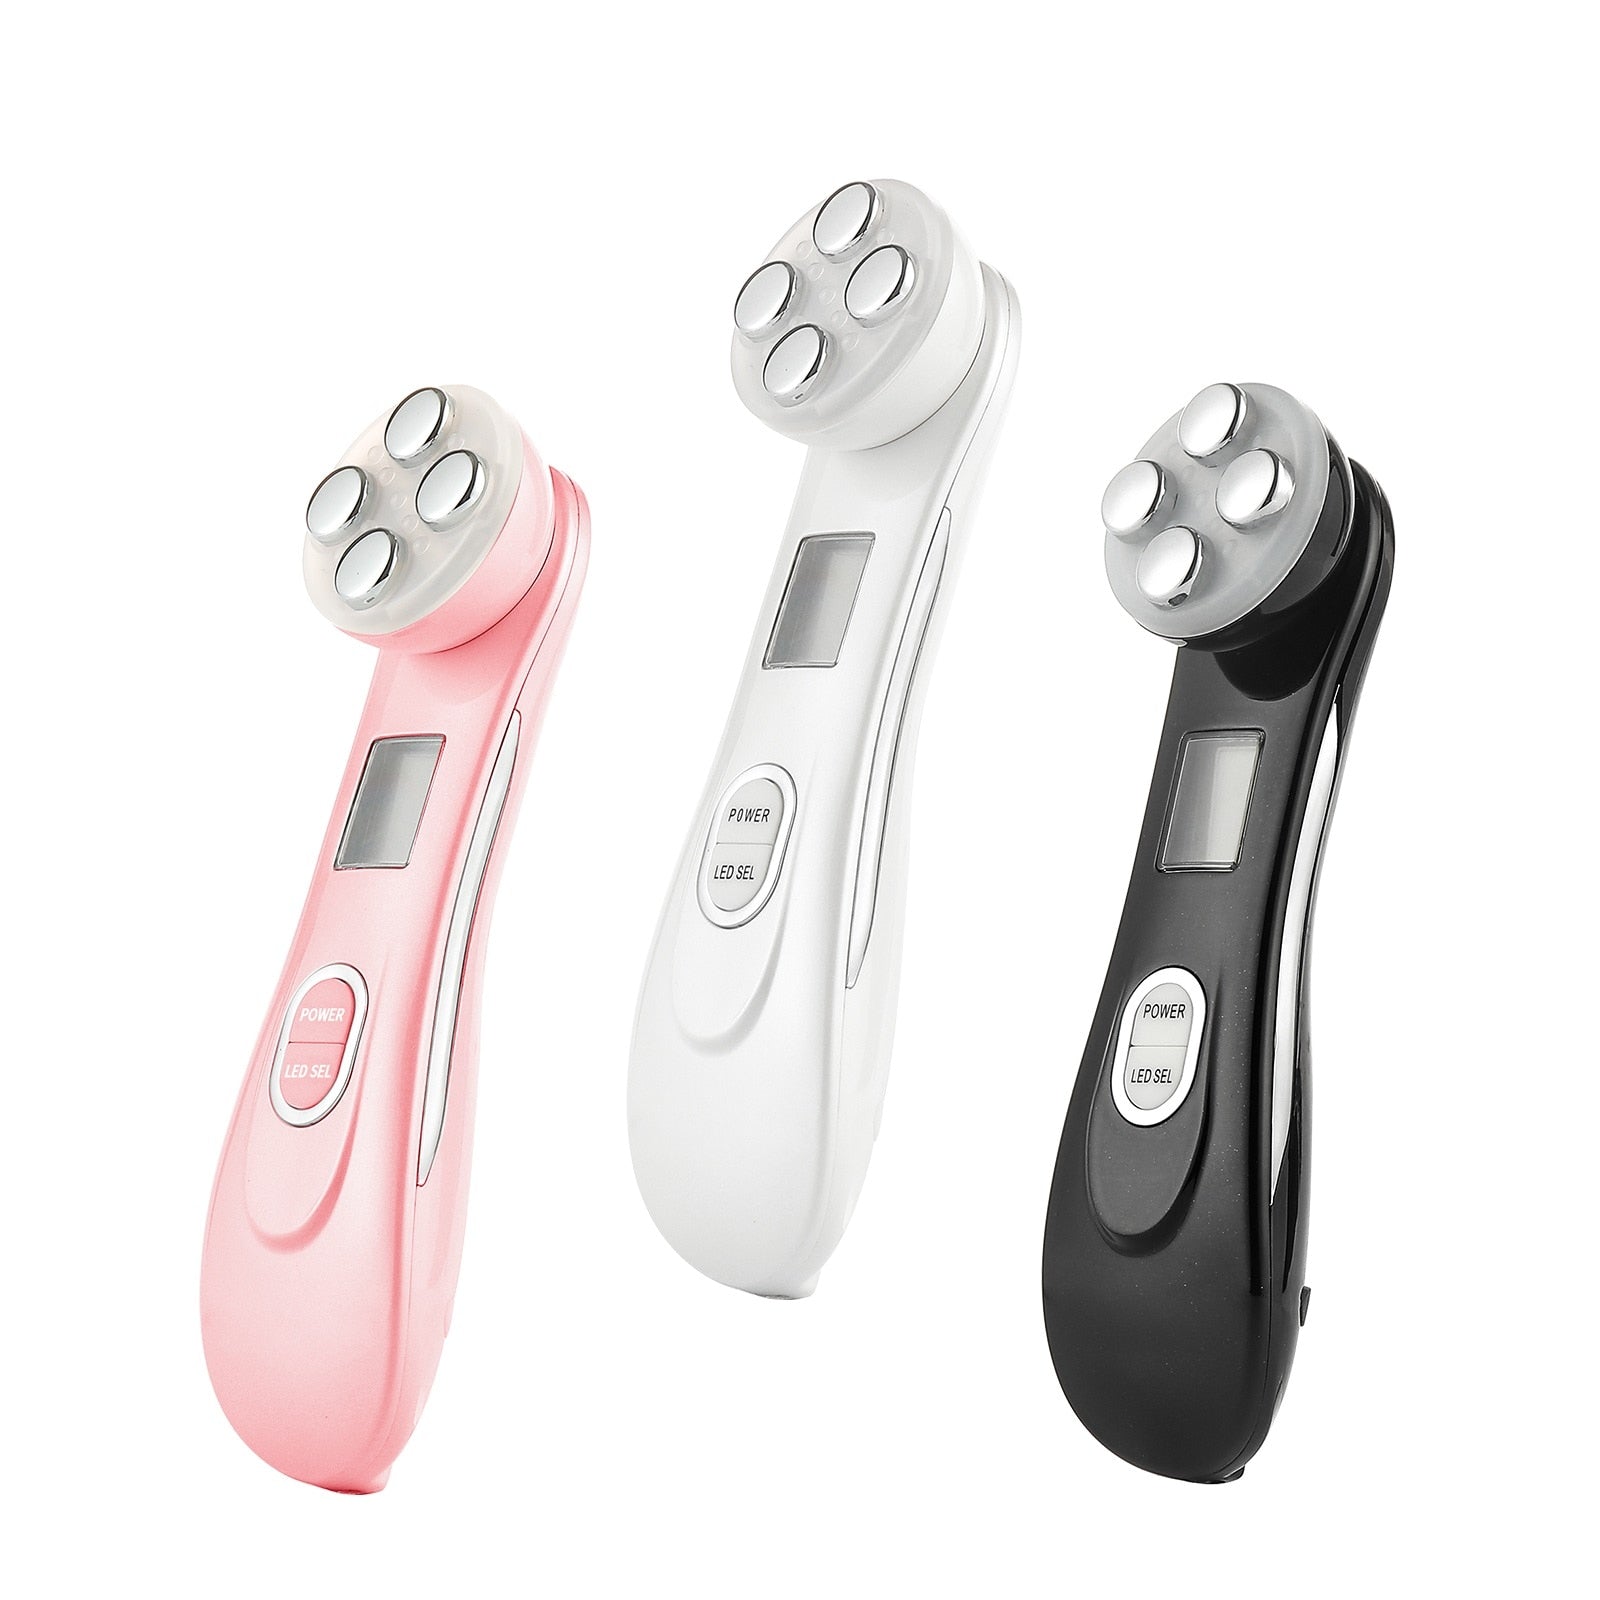 Anti-Aging and Face Lift Massager